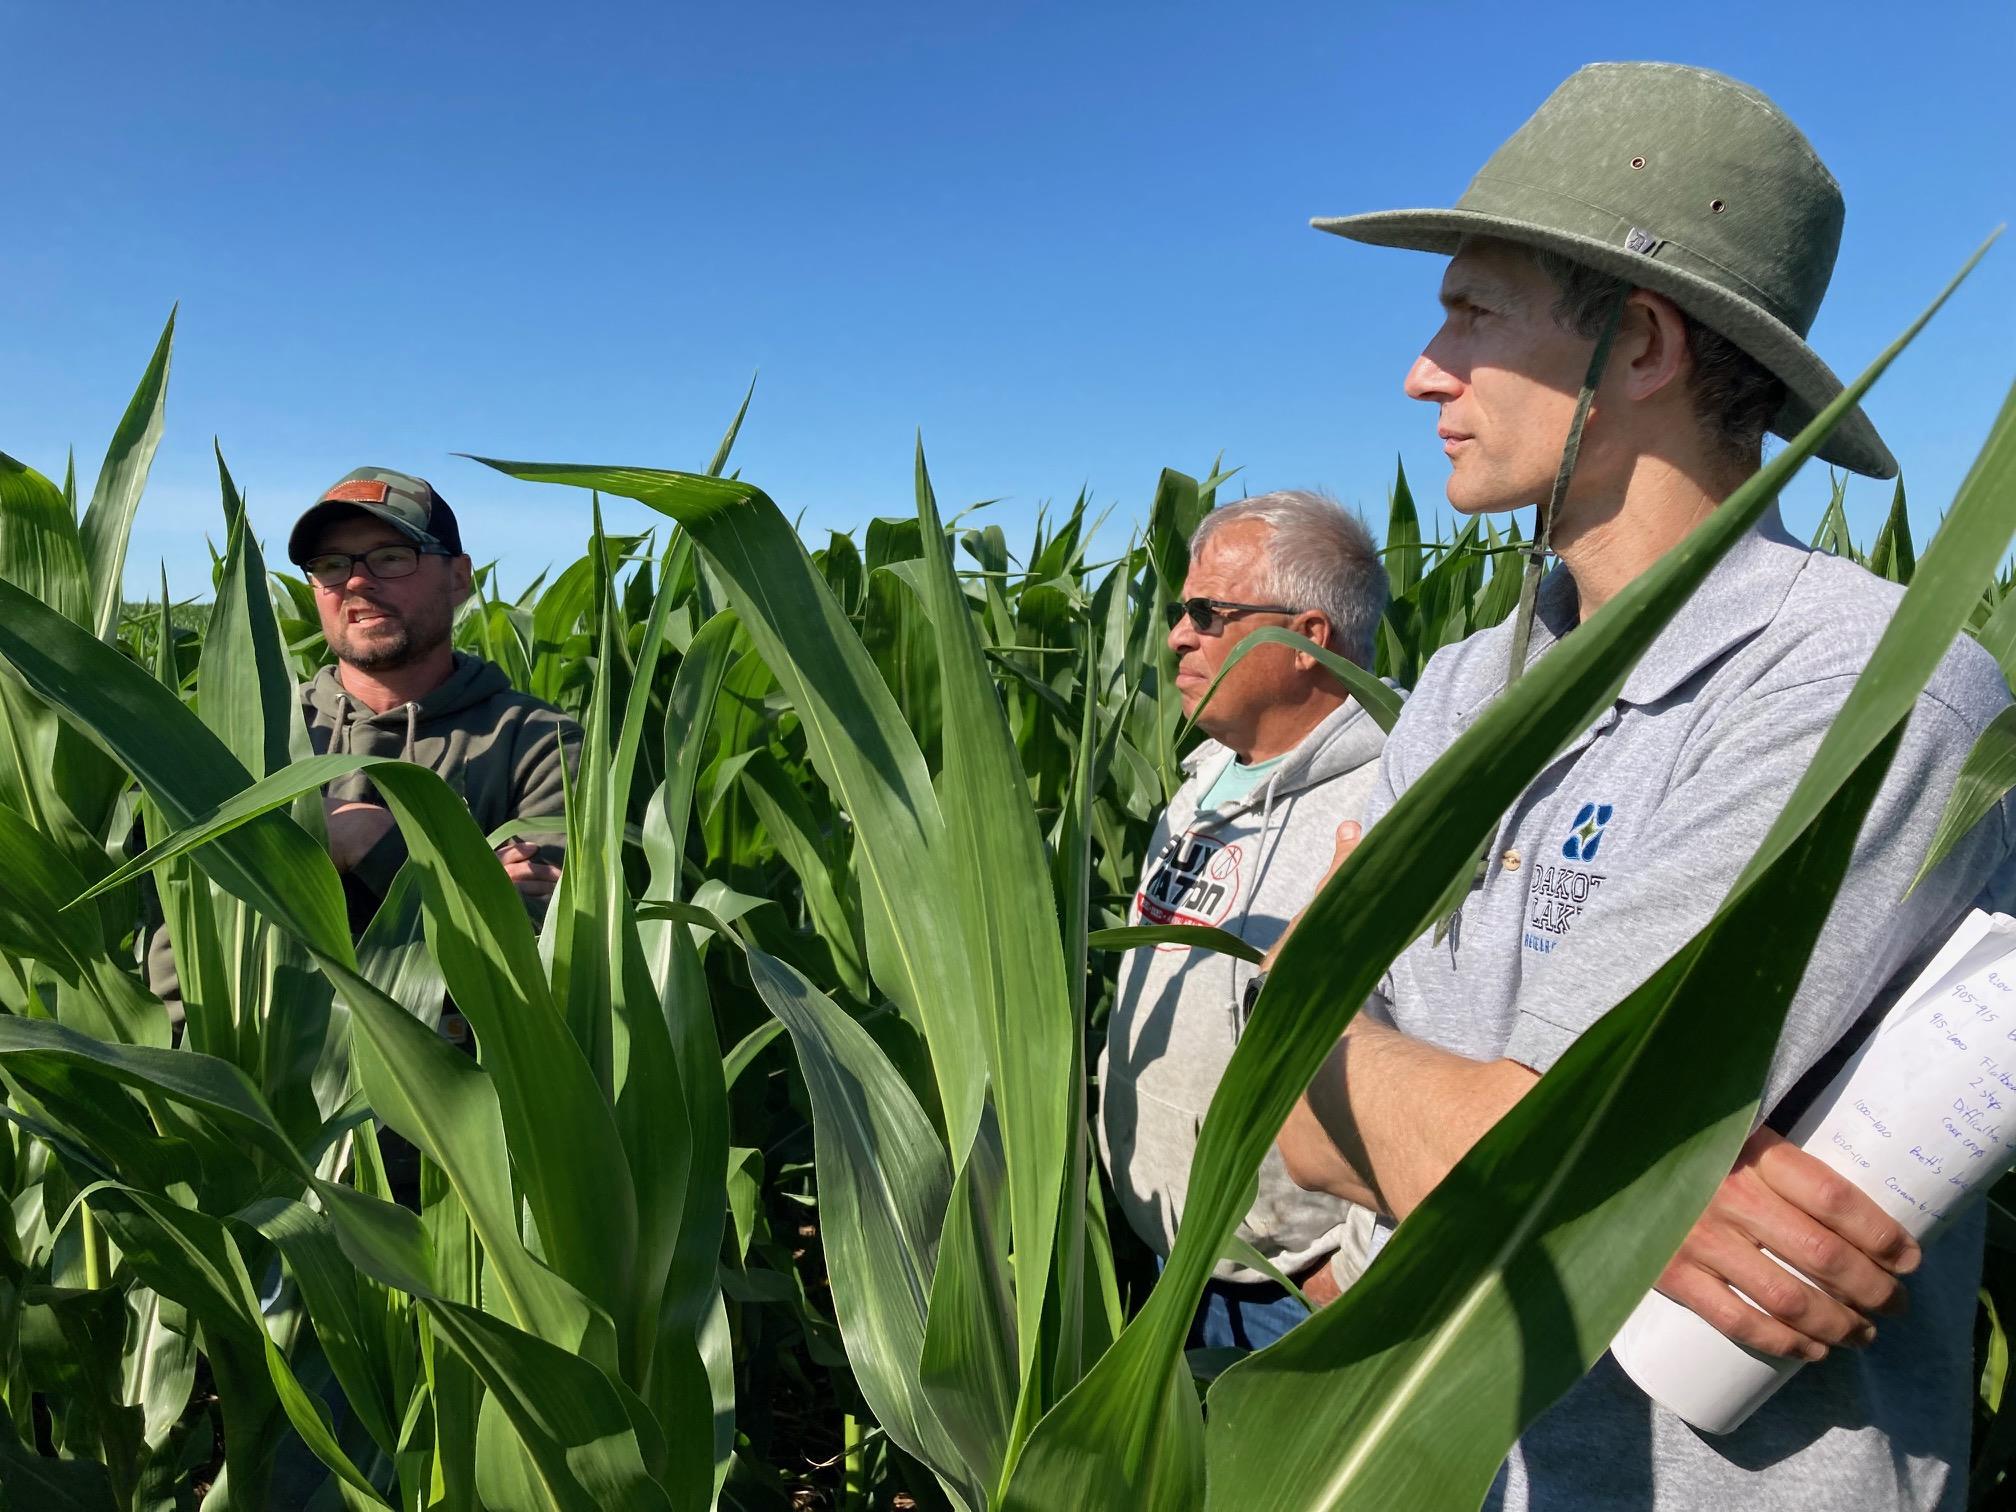 Dr. Cody Zilverberg (right) and Dan Forgey (center) listen in as Brett Huber (right) explains how he seeded a cover crop after a hailstorm in 2022, grazed the cover crop and then planted corn this year.